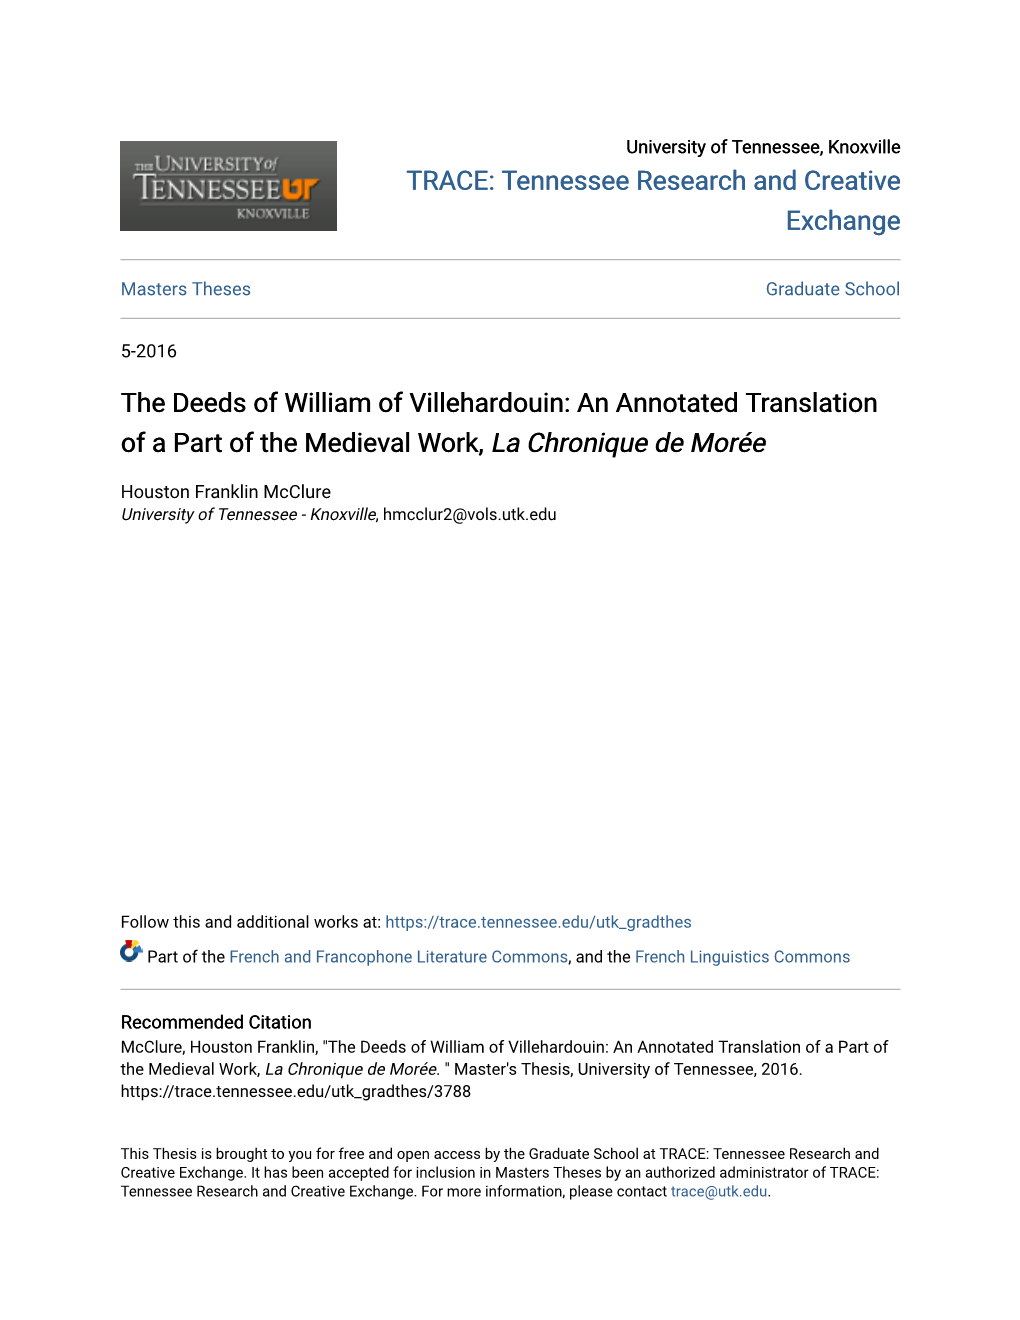 The Deeds of William of Villehardouin: an Annotated Translation of a Part of the Medieval Work, La Chronique De Morée